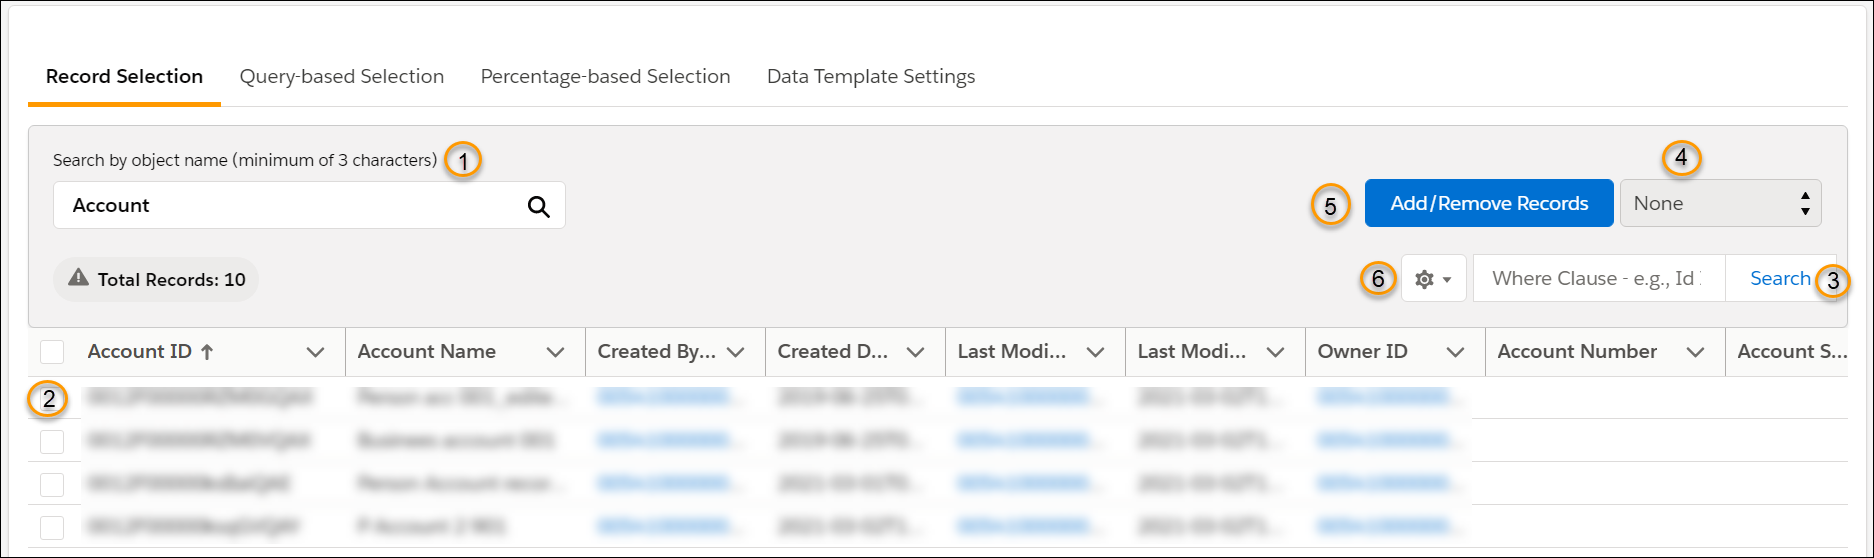 Salesforce_App_Data_Template_Record Selection.png